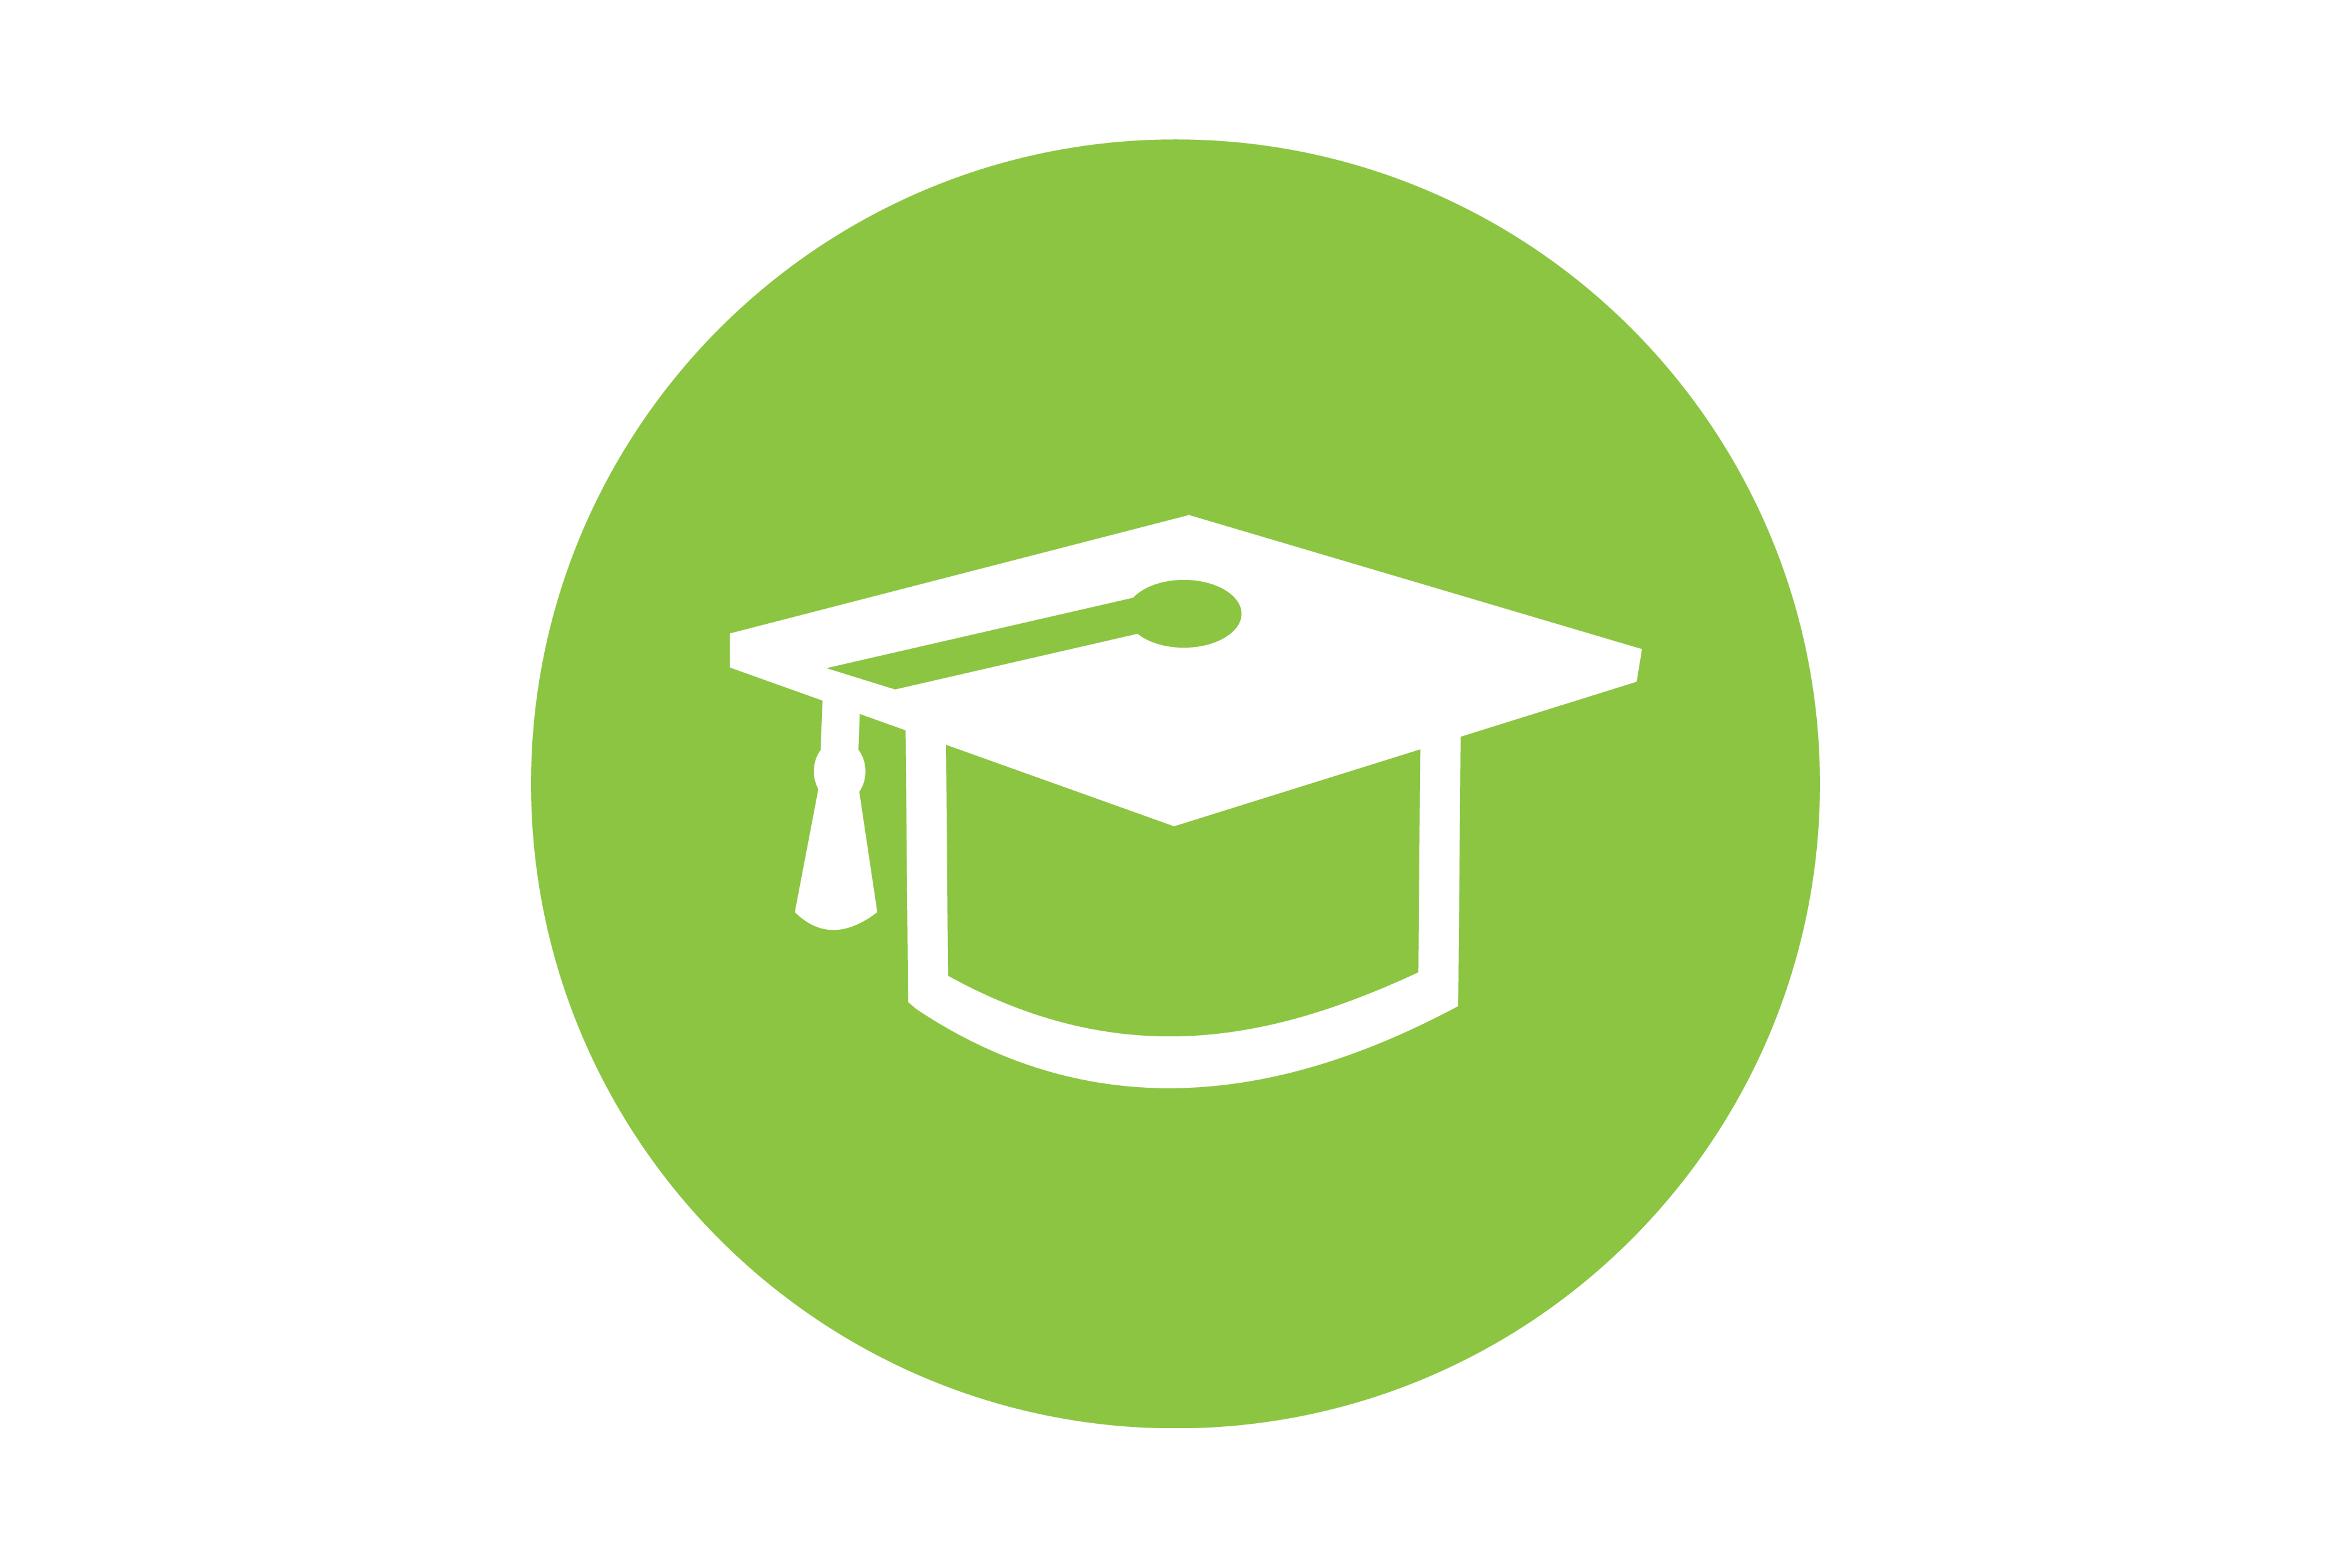 Green icon with a white graduation cap.